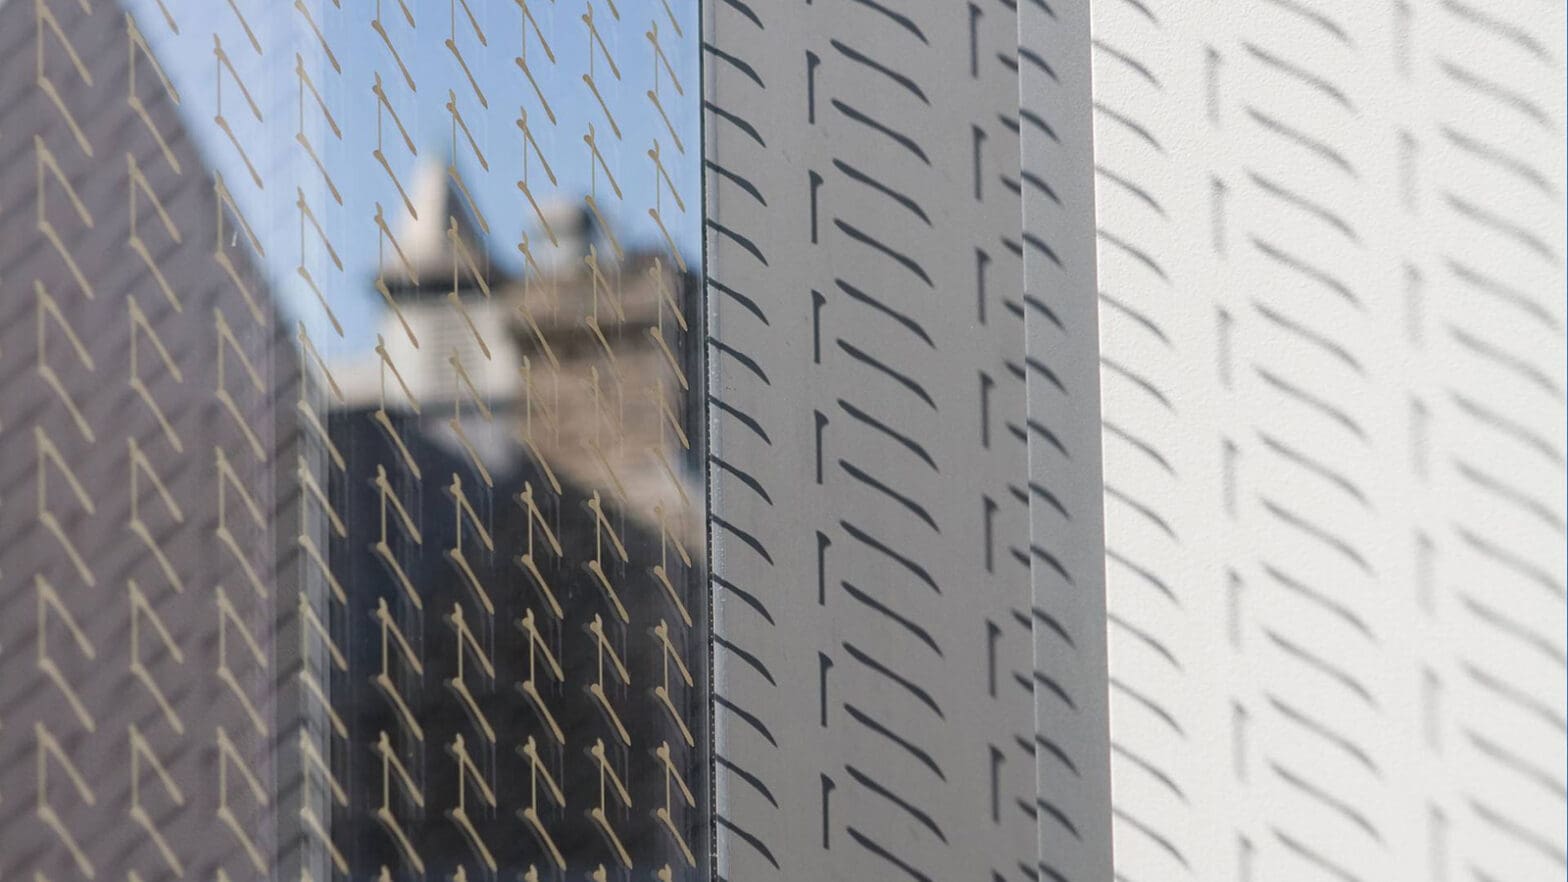 Close-up of "frit" marks in the glass of Sherrerd Hall with reflections of another University building and patterns of light and dark gray